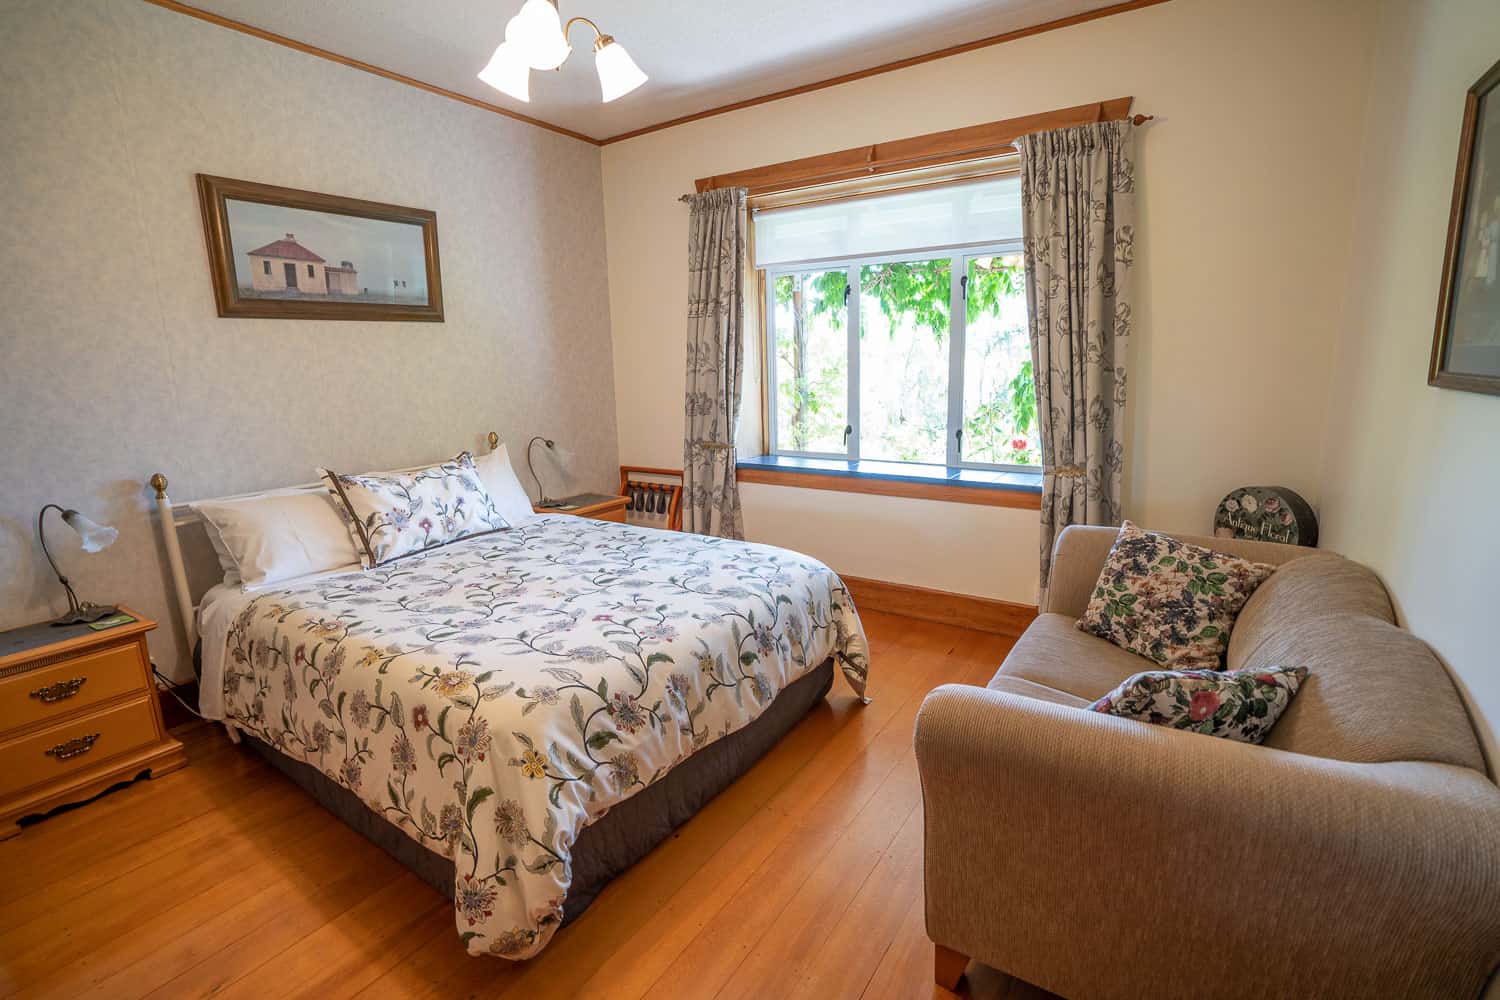 Double room at the Olde Mill House B&B in Renwick, Marlborough in New Zealand